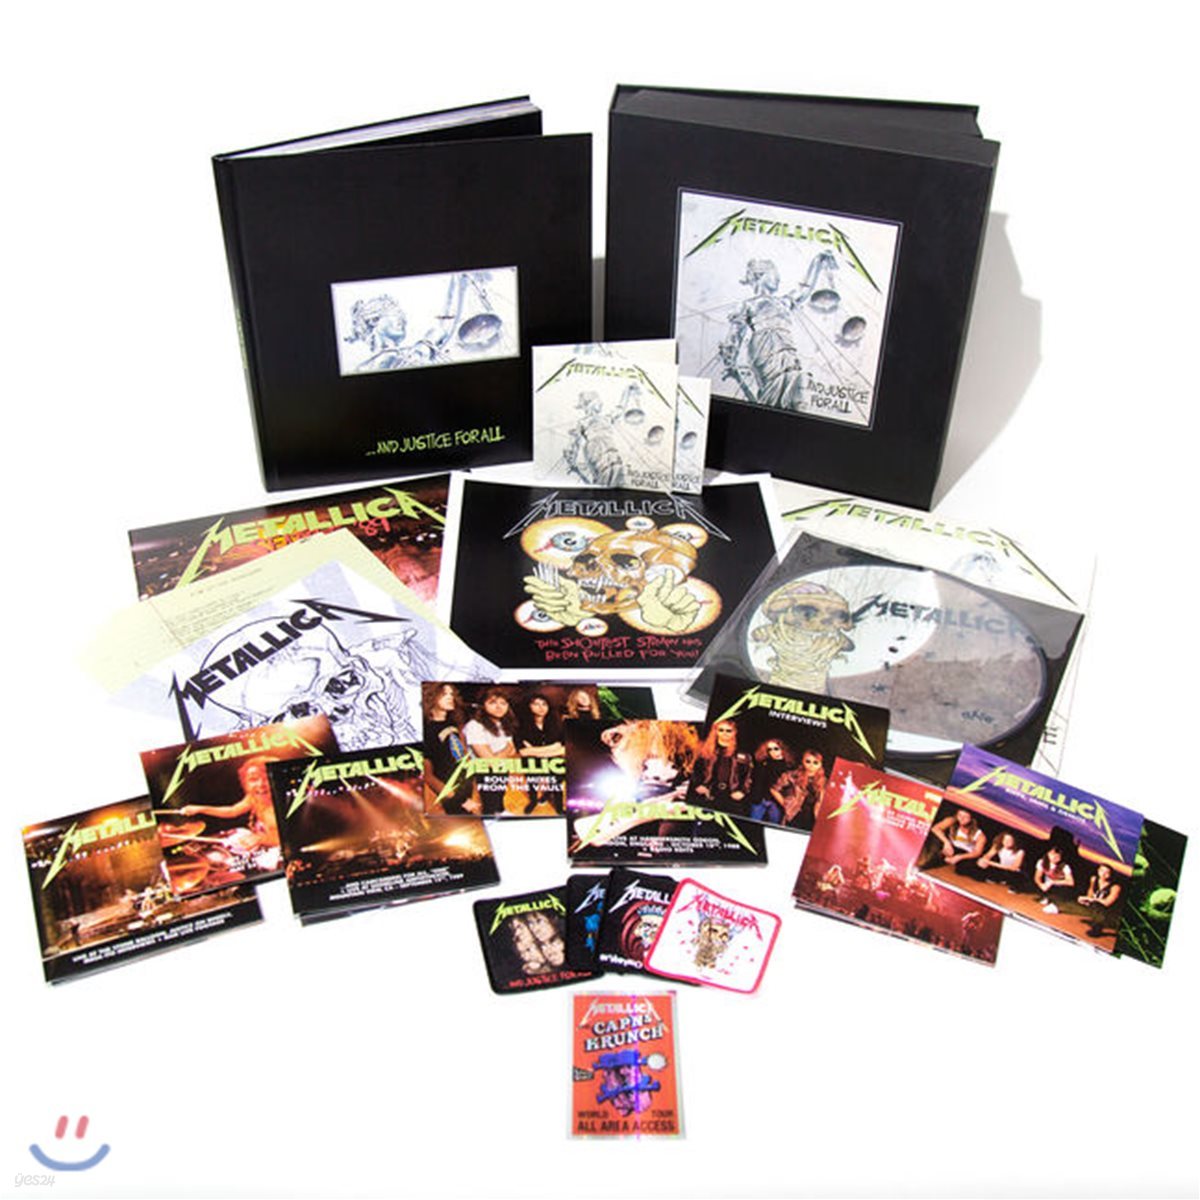 Metallica (메탈리카) - …And Justice for All [6LP+11CD+4DVD Deluxe Box Set]